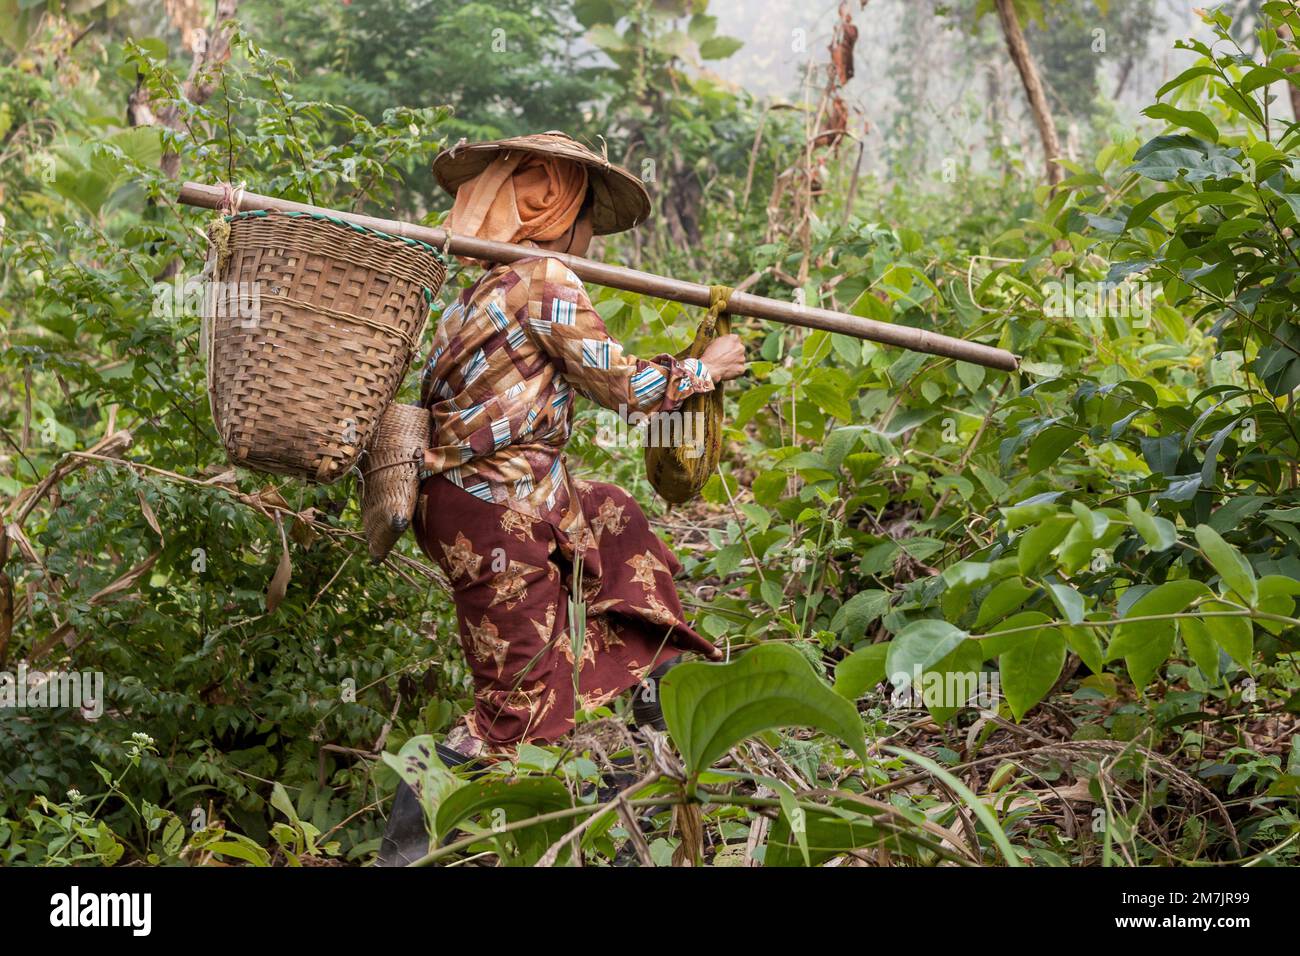 HSIPAW, MYANMAR - Nov 30, 2014: Palaung woman with basket passing through the jungle near Hsipaw in Myanmar. Stock Photo